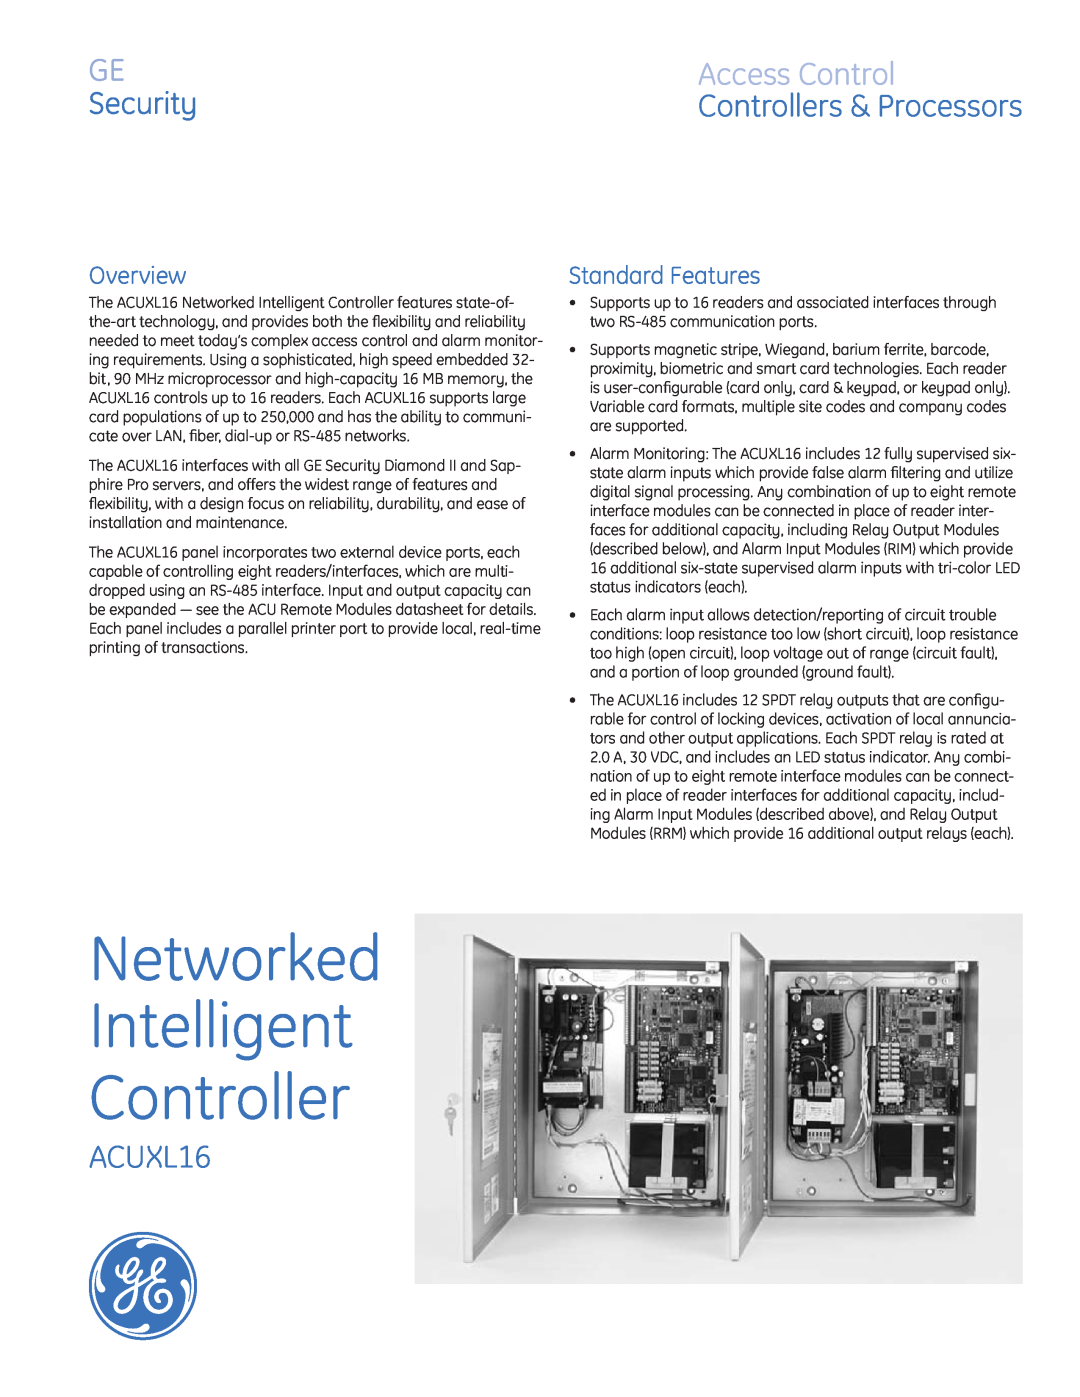 GE ACUXL16 manual Overview, Standard Features, Networked Intelligent Controller, Access Control, Controllers & Processors 